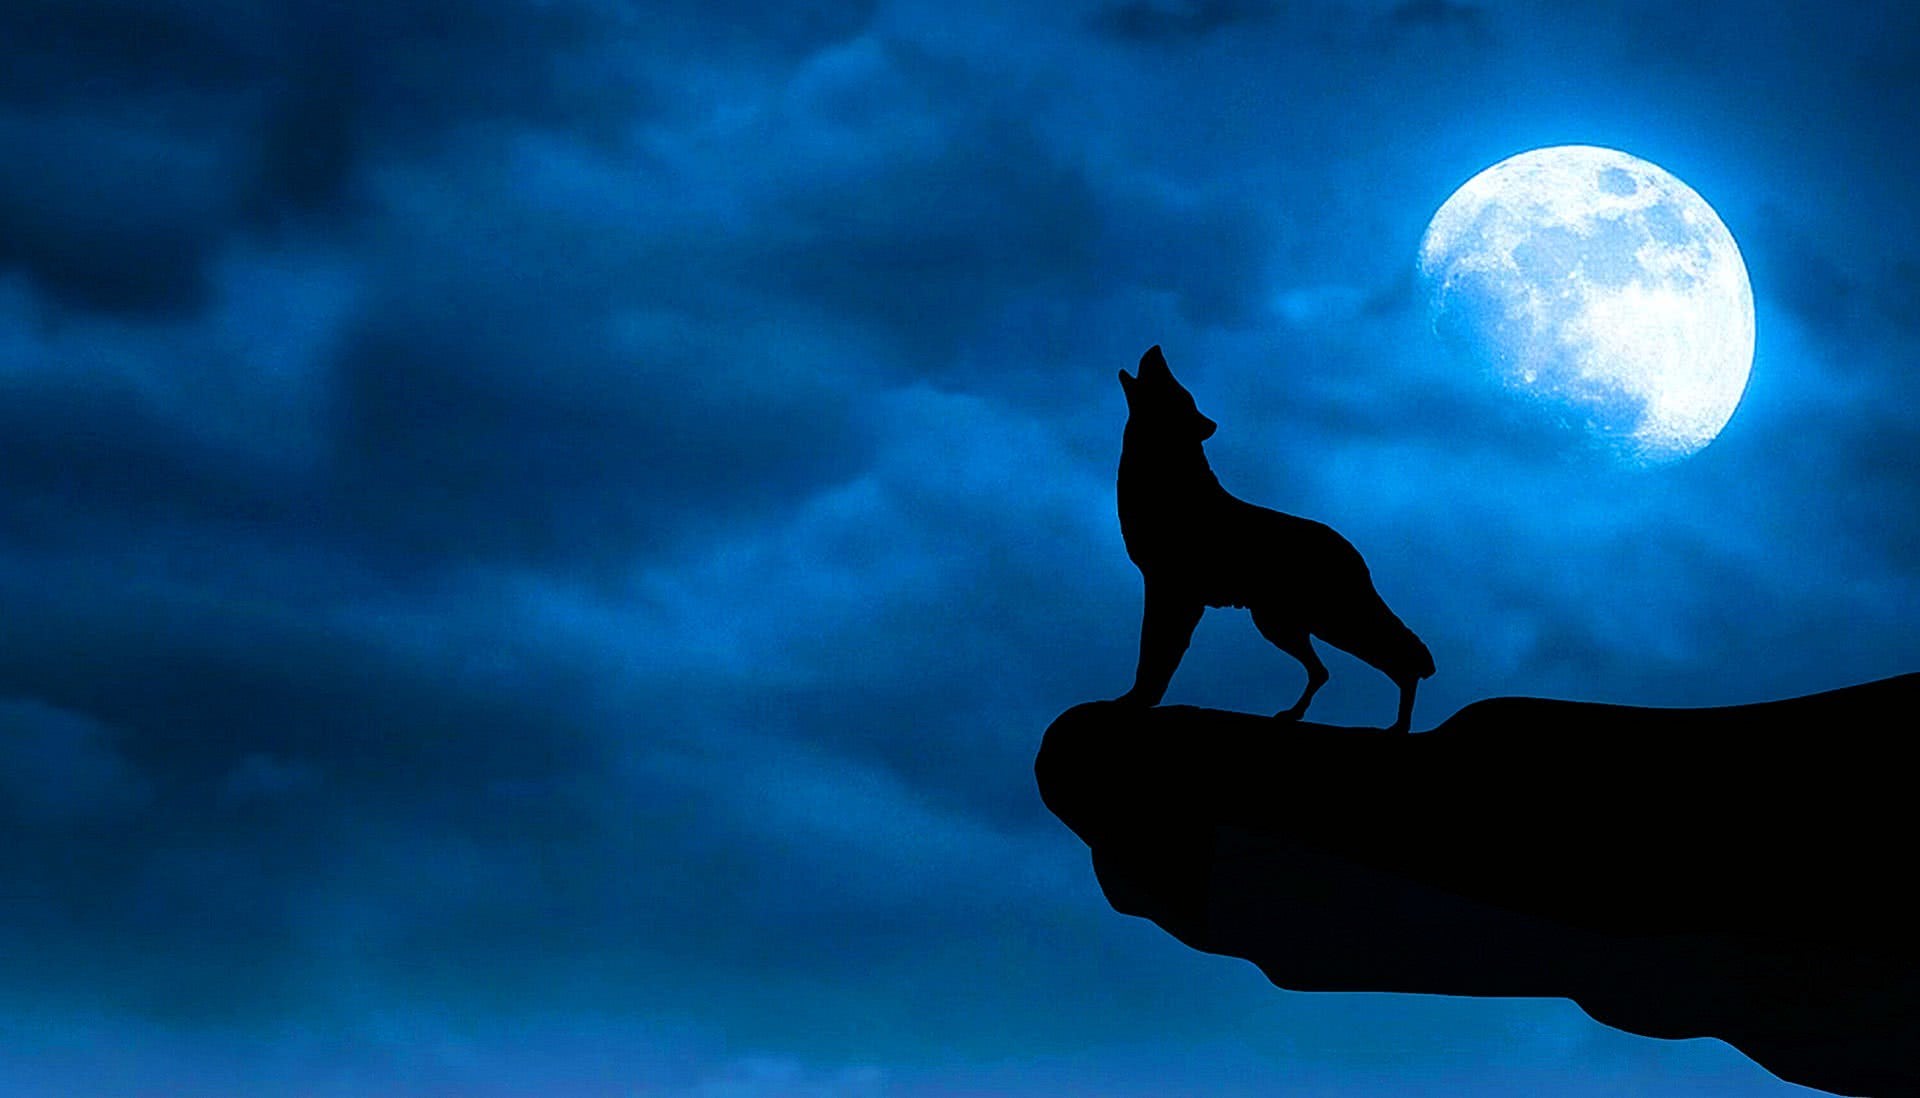 Cool Blue Wolf Wallpaper Image 72